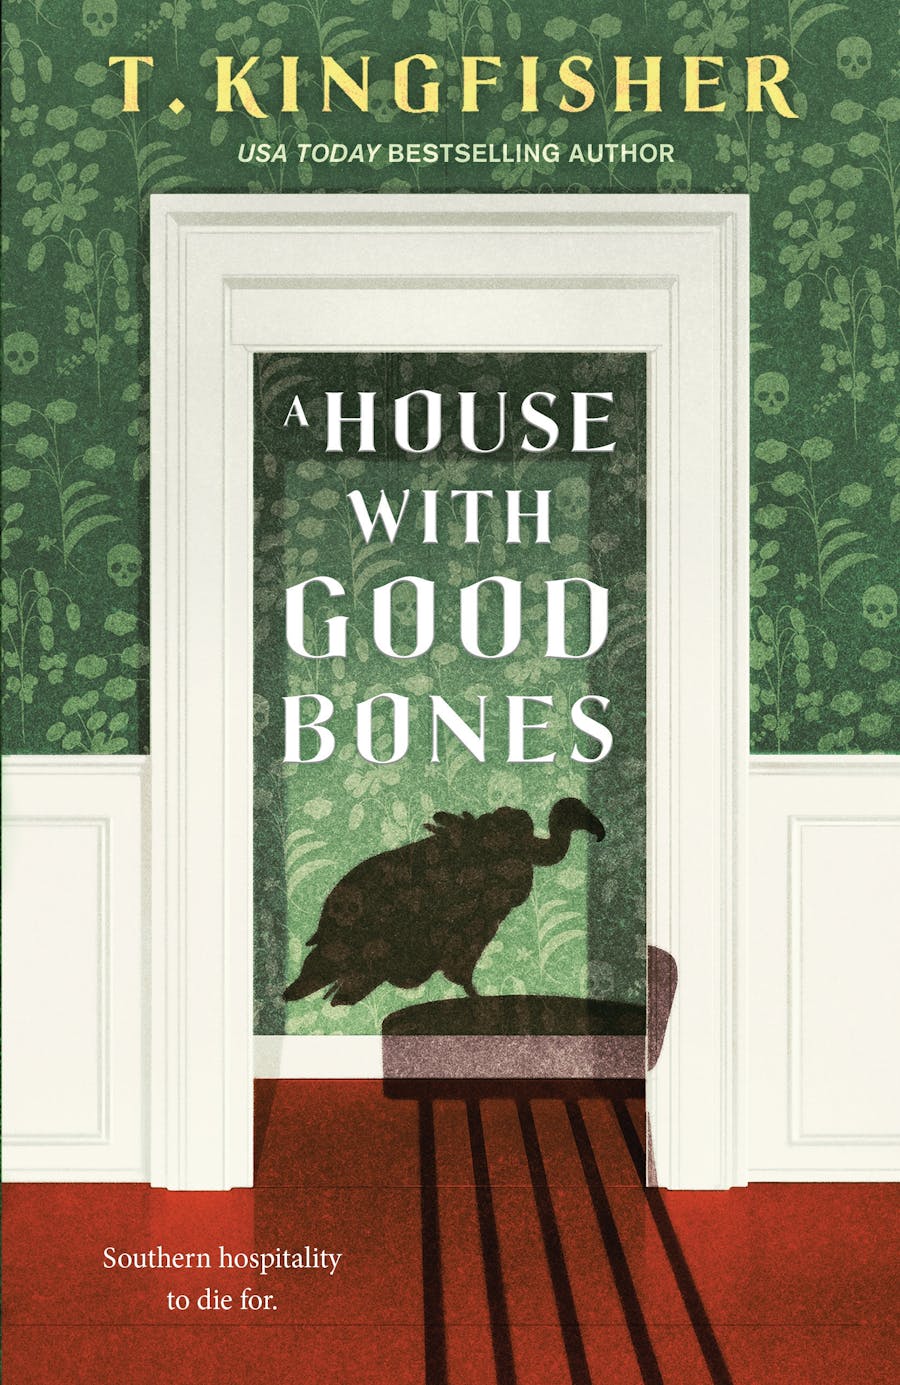 Cover art for A House with Good Bones by T. Kingfisher (Tor/Nightfire)